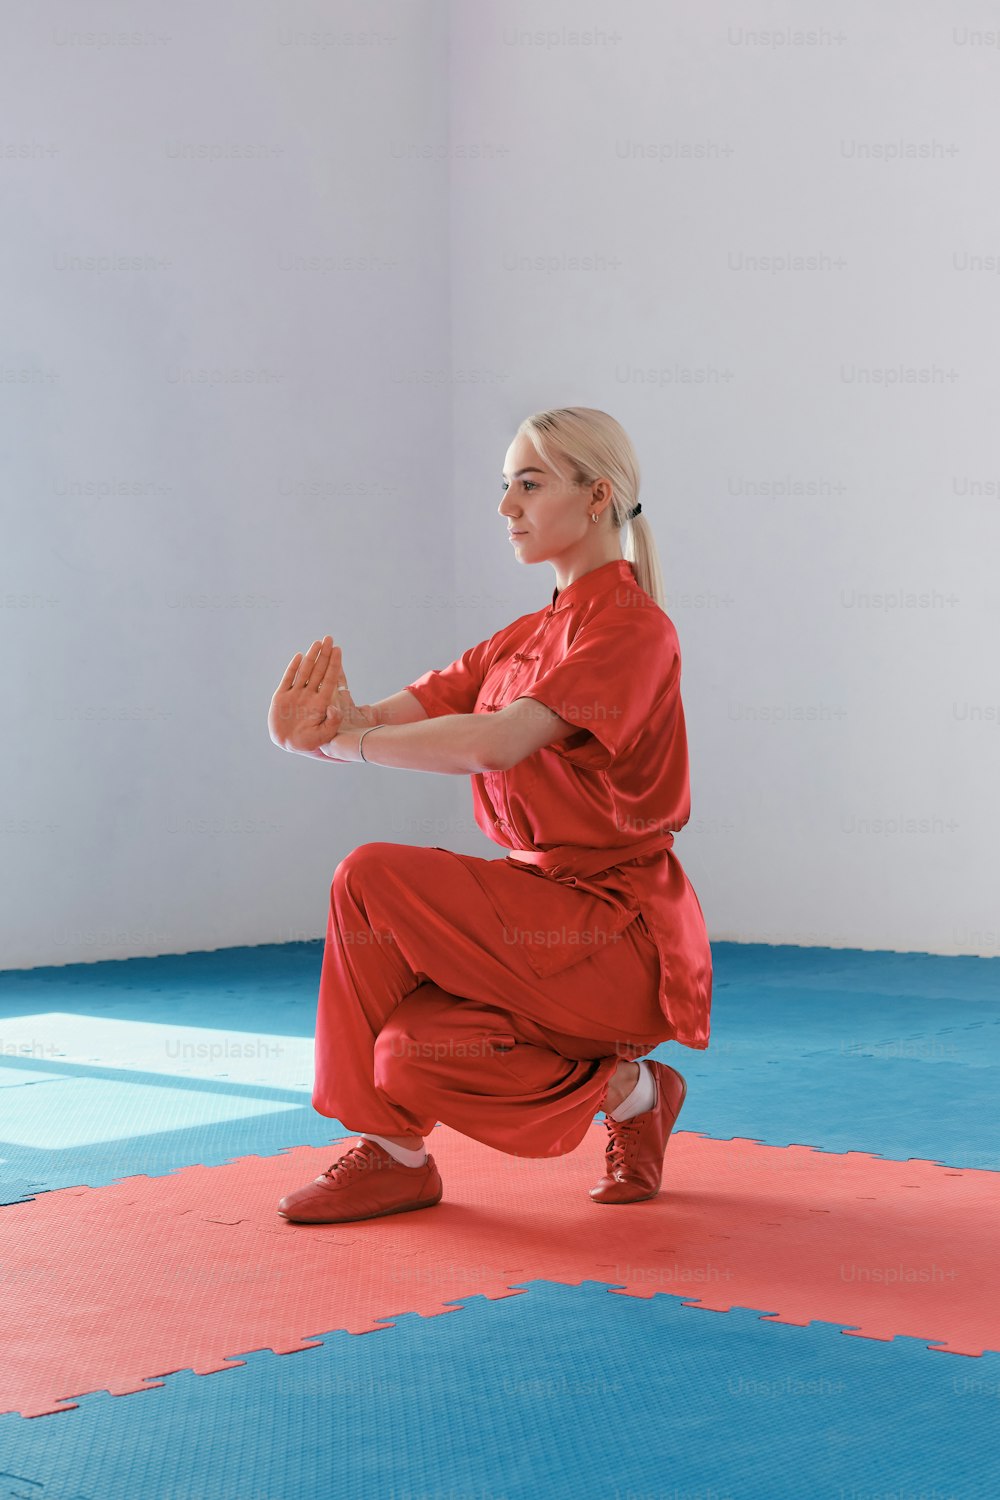 a woman in a red outfit doing a yoga pose